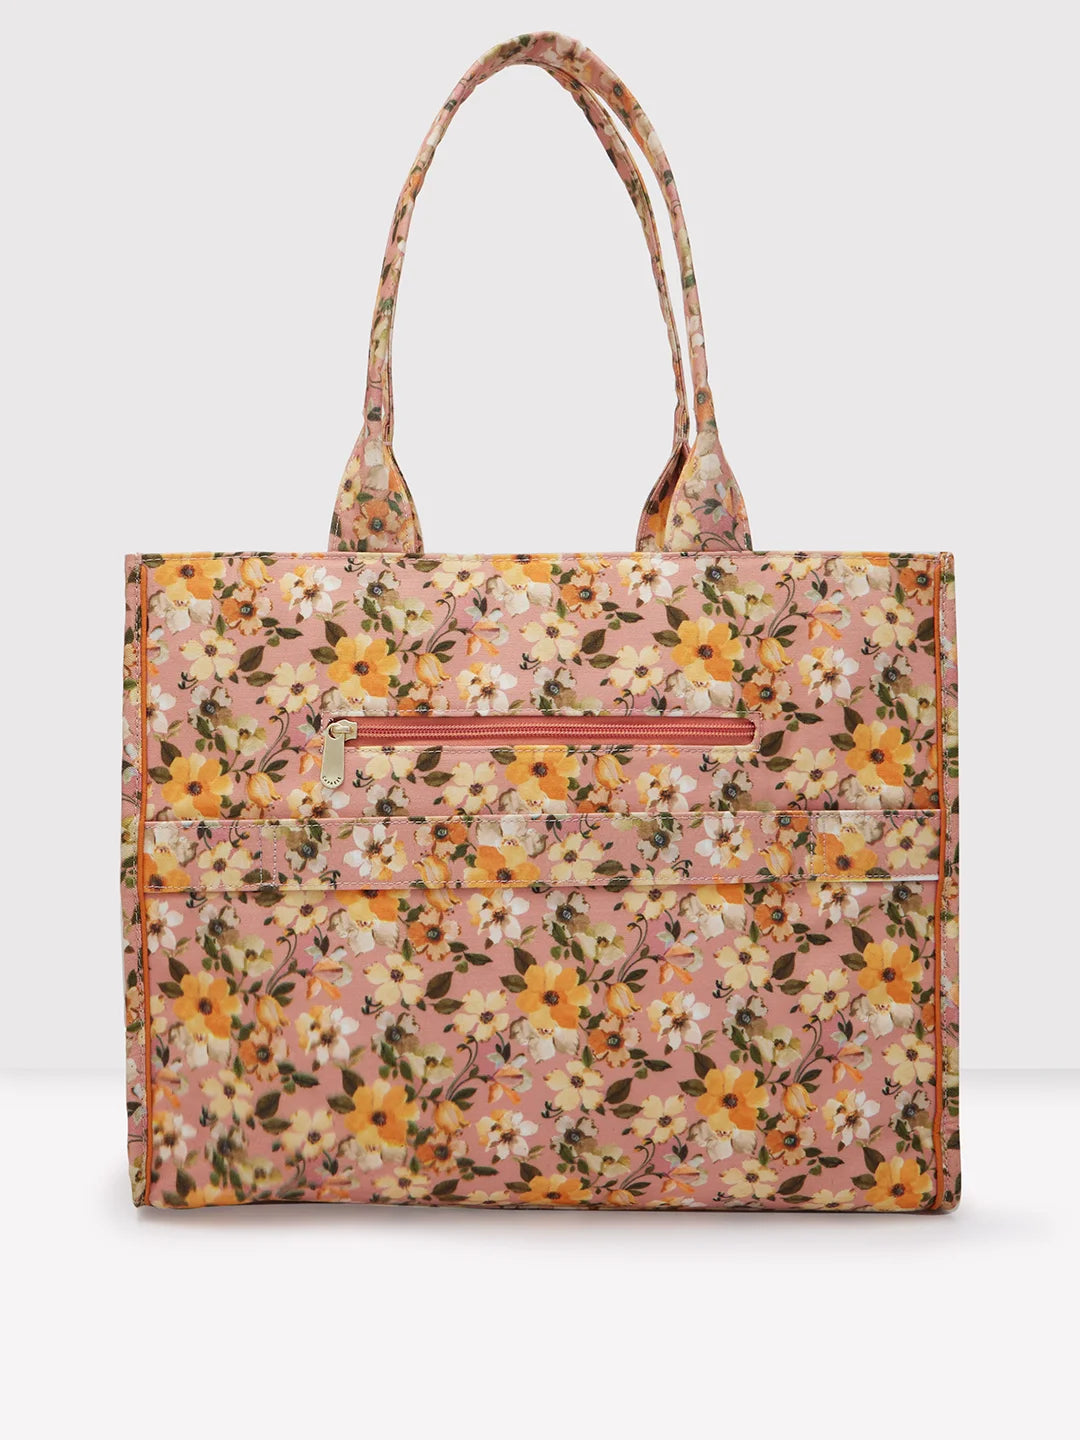 Caprese ORCHID TOTE X-LARGE YELLOW